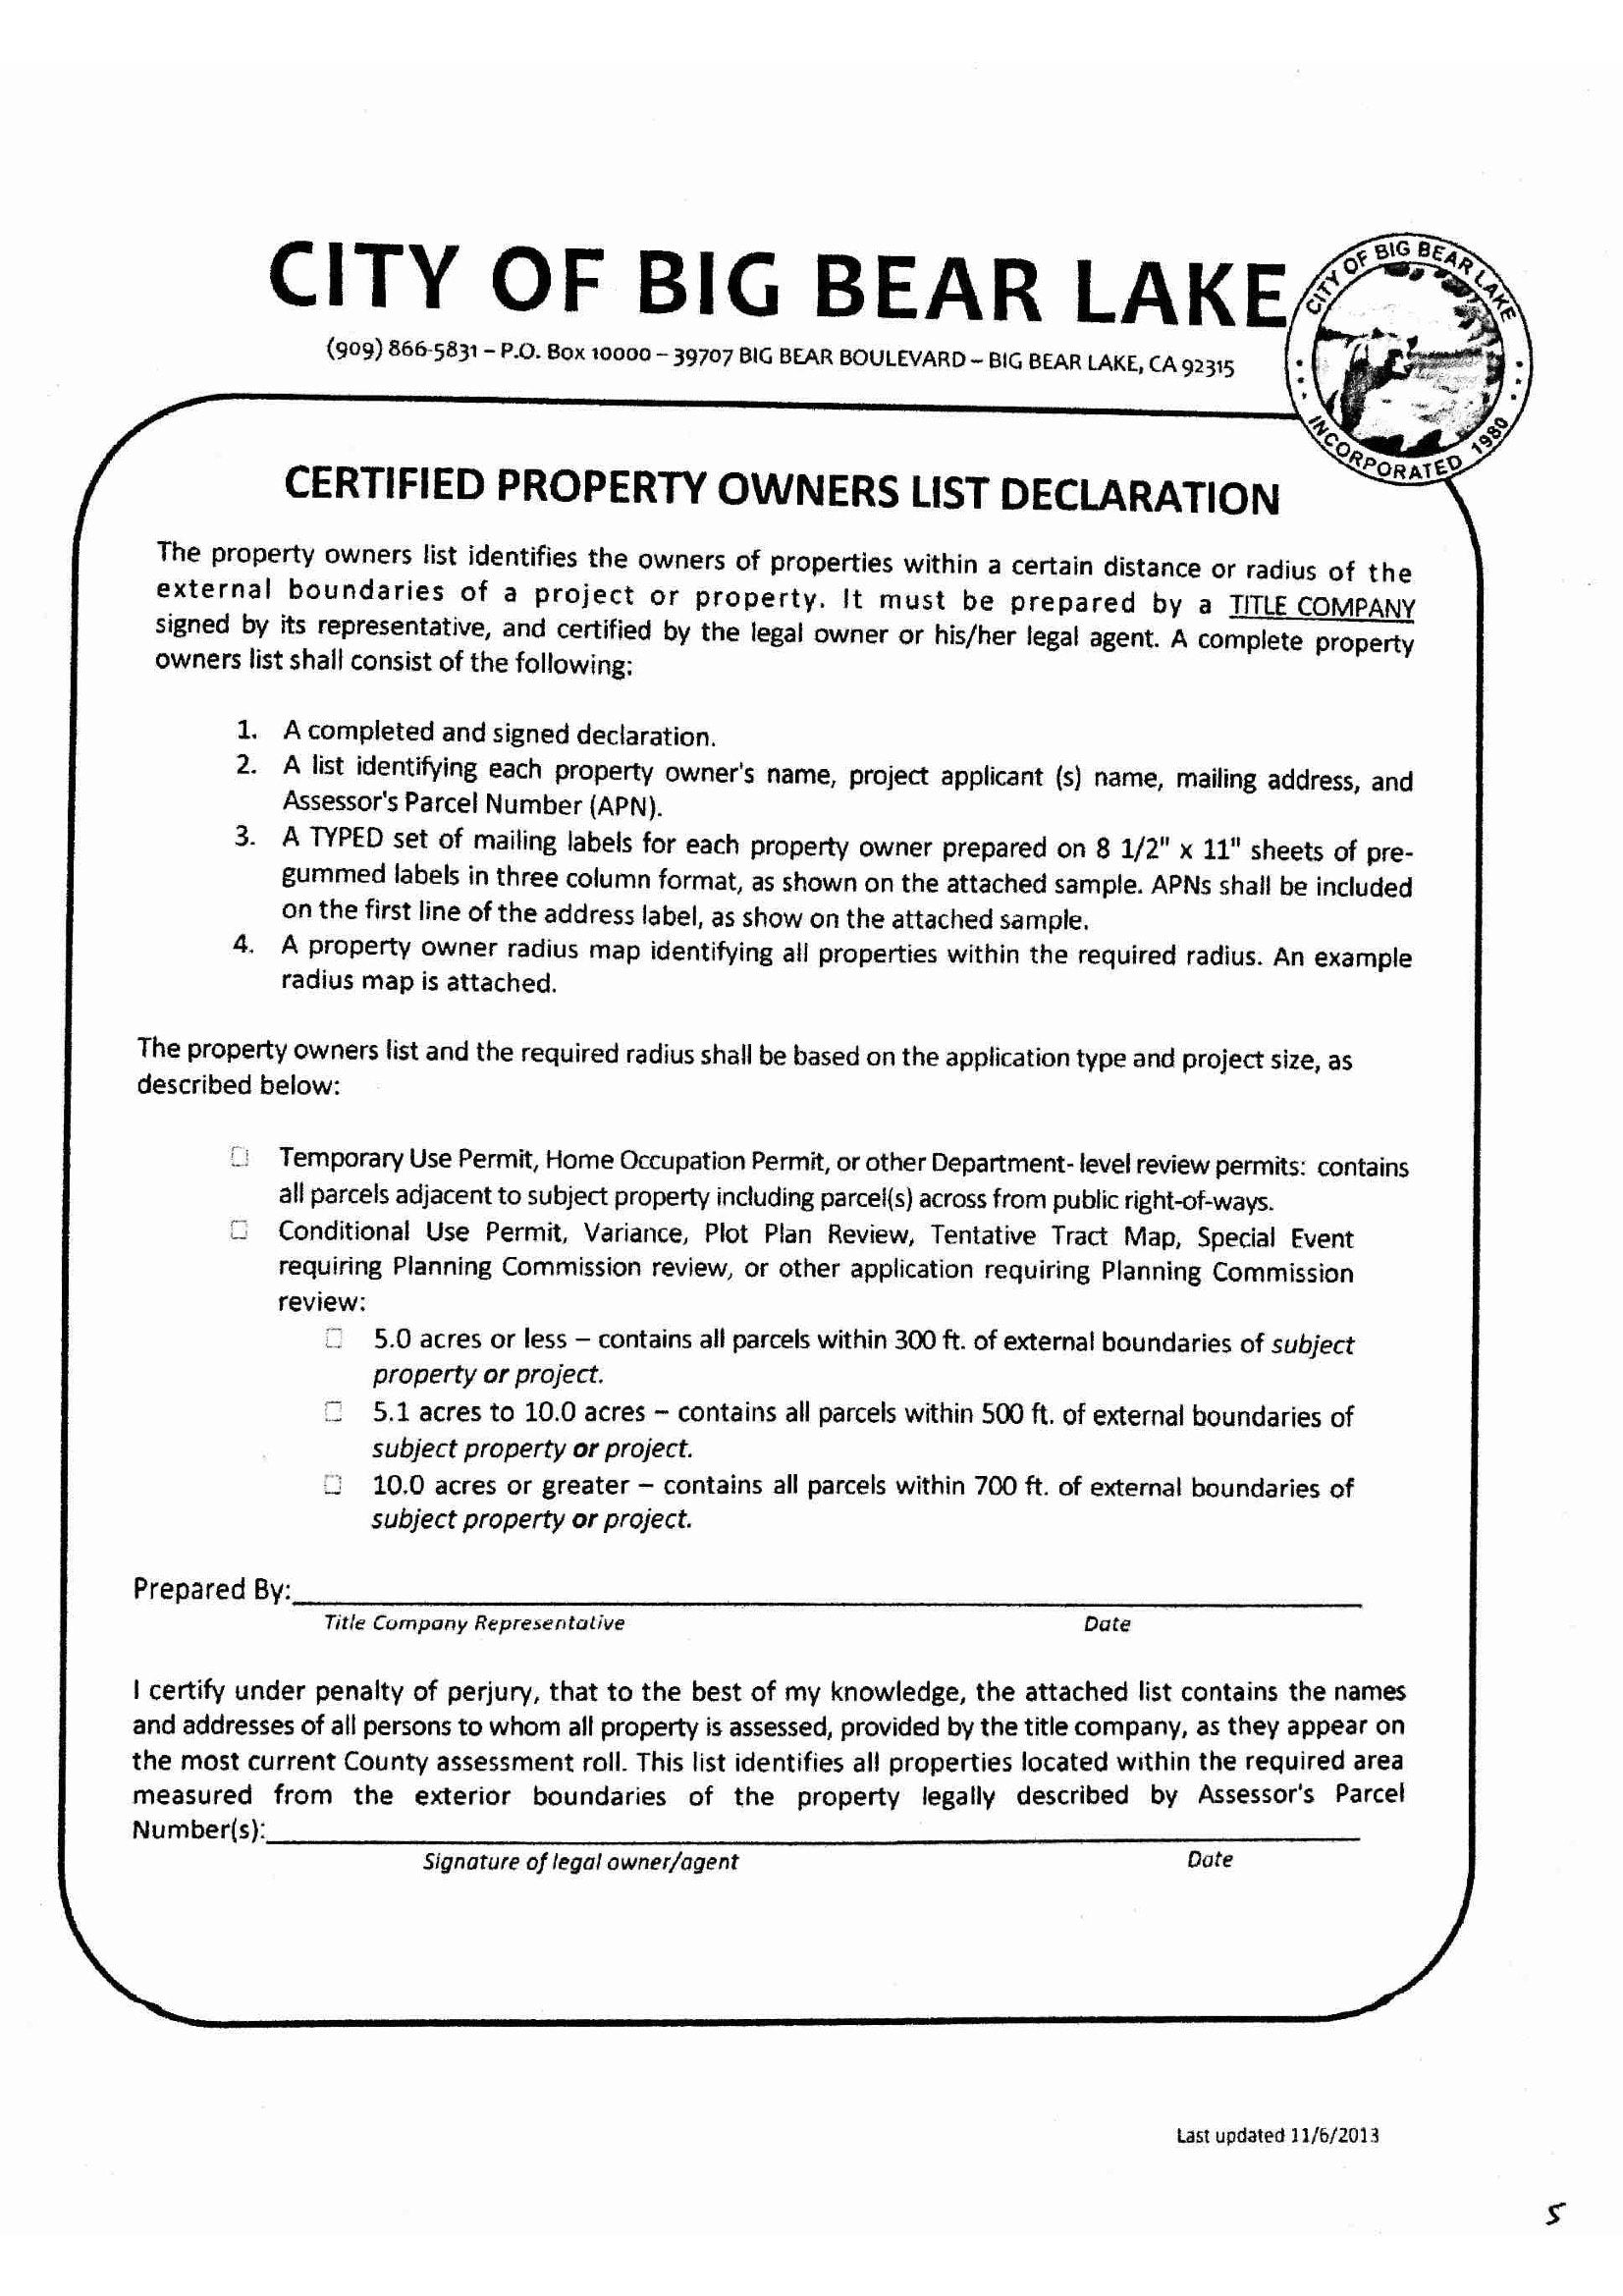 City of Big Bear Lake Certified Property Owners List Declaration. 300ft, 500ft, 700ft. Typed List of Mailing Labels